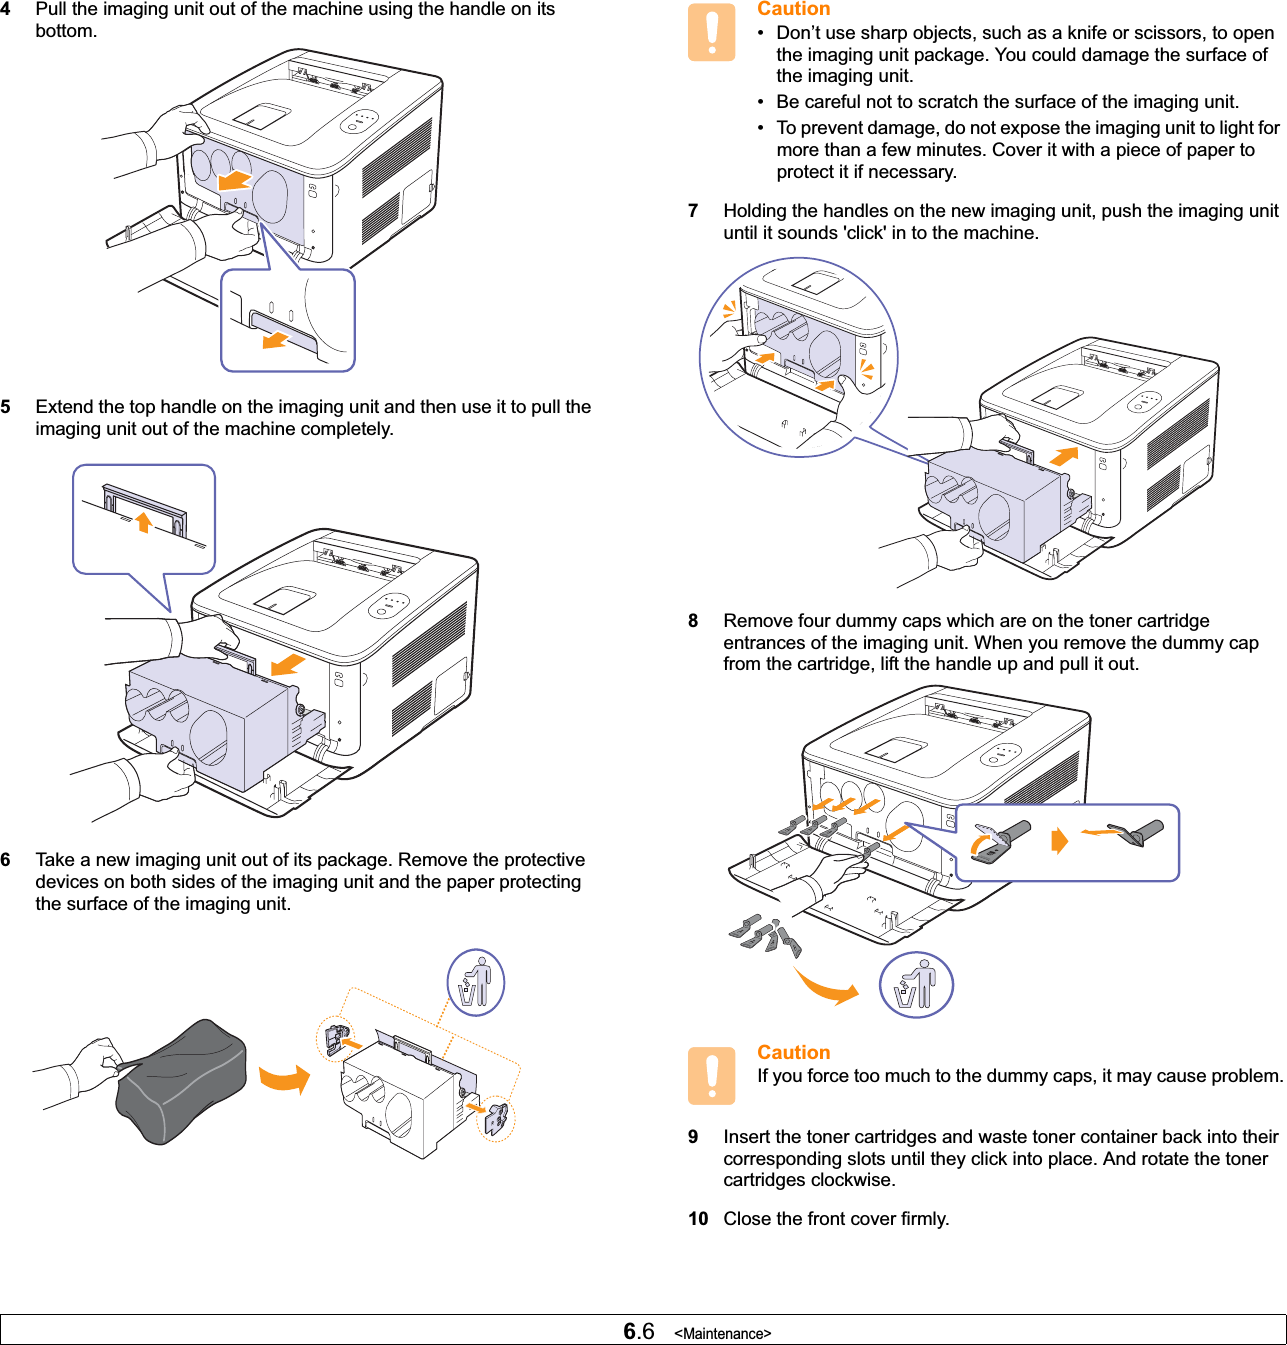 6.6   &lt;Maintenance&gt;4Pull the imaging unit out of the machine using the handle on its bottom.5Extend the top handle on the imaging unit and then use it to pull the imaging unit out of the machine completely.6Take a new imaging unit out of its package. Remove the protective devices on both sides of the imaging unit and the paper protecting the surface of the imaging unit.Caution• Don’t use sharp objects, such as a knife or scissors, to open the imaging unit package. You could damage the surface of the imaging unit.• Be careful not to scratch the surface of the imaging unit.• To prevent damage, do not expose the imaging unit to light for more than a few minutes. Cover it with a piece of paper to protect it if necessary.7Holding the handles on the new imaging unit, push the imaging unit until it sounds &apos;click&apos; in to the machine. 8Remove four dummy caps which are on the toner cartridge entrances of the imaging unit. When you remove the dummy cap from the cartridge, lift the handle up and pull it out.CautionIf you force too much to the dummy caps, it may cause problem.9Insert the toner cartridges and waste toner container back into their corresponding slots until they click into place. And rotate the toner cartridges clockwise. 10 Close the front cover firmly. 